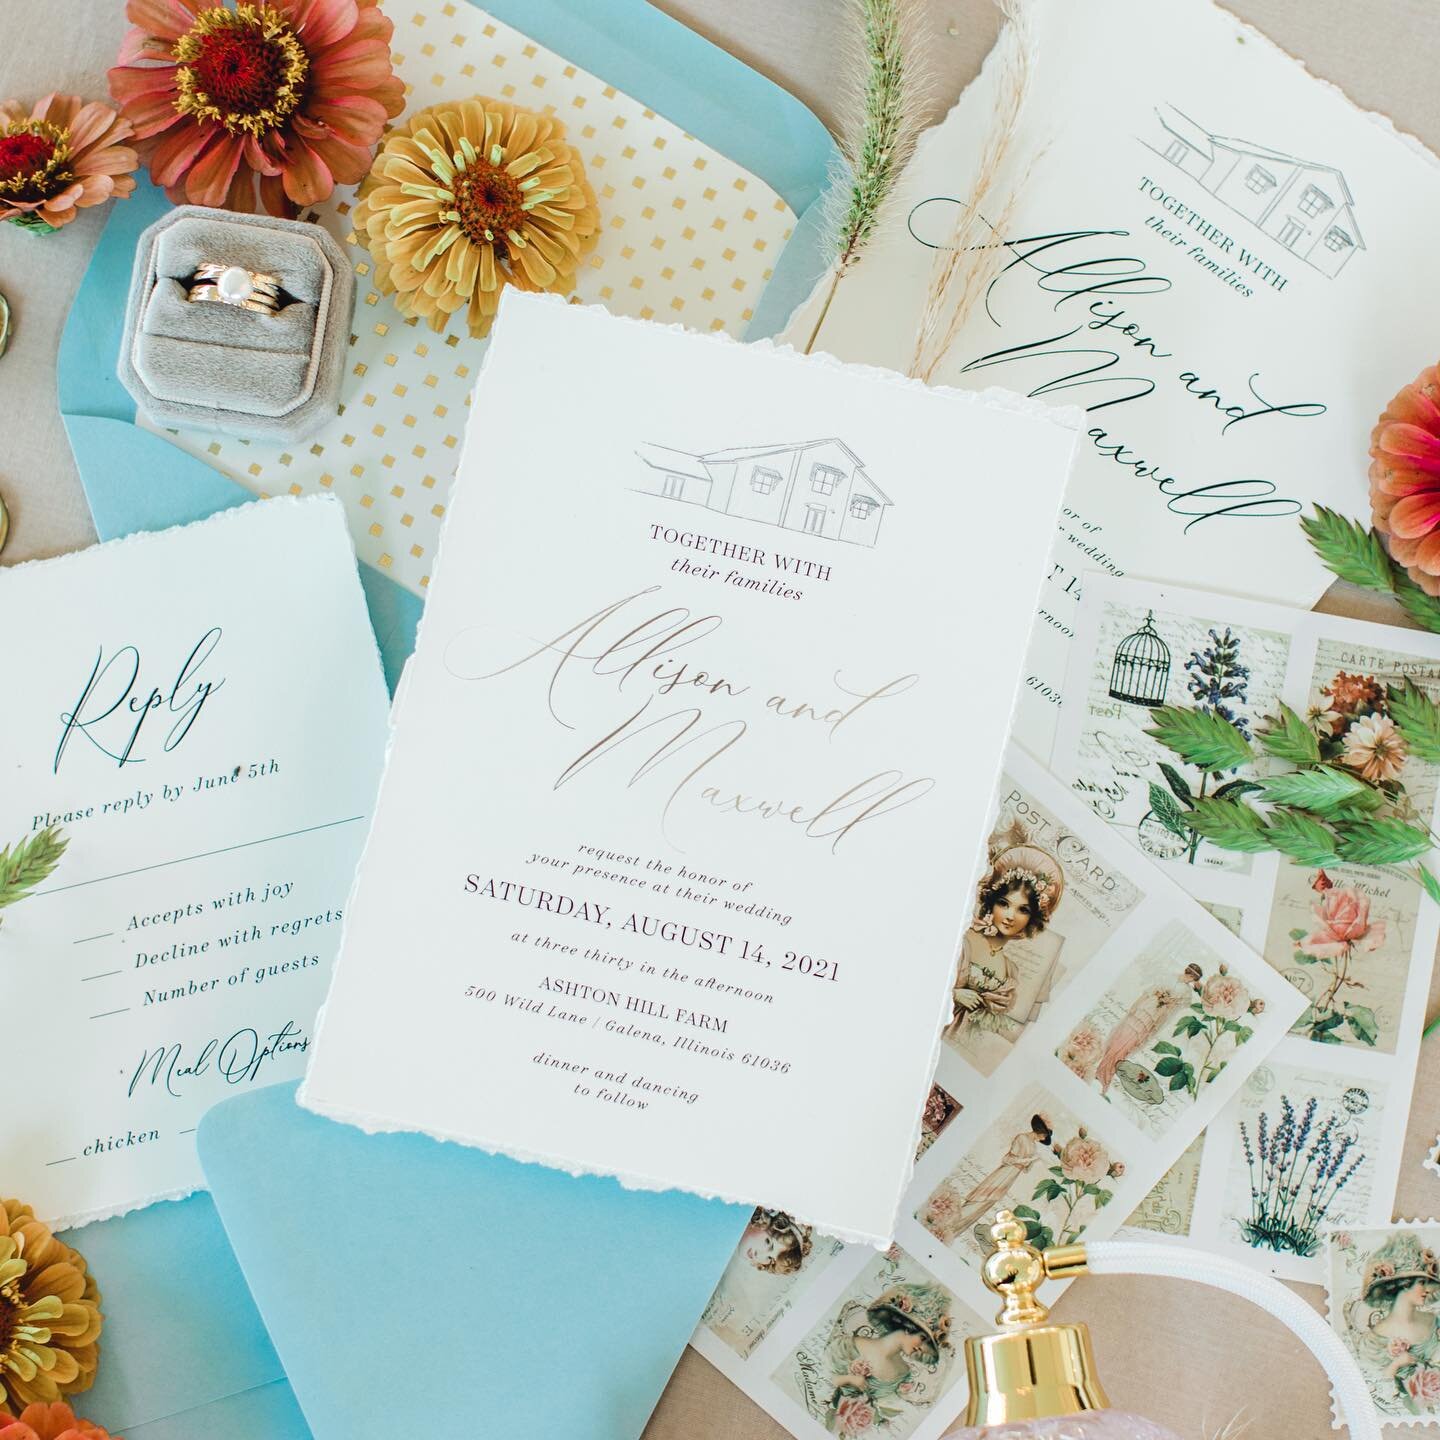 Invite Suite Swoon 🌸 
Awhile back the incredibly talented team @mostlybecky asked me to design some wedding paper goods for them! Had to share some of the amazing shots featuring my designs and some of the other ridiculously talented and gorgeous ve